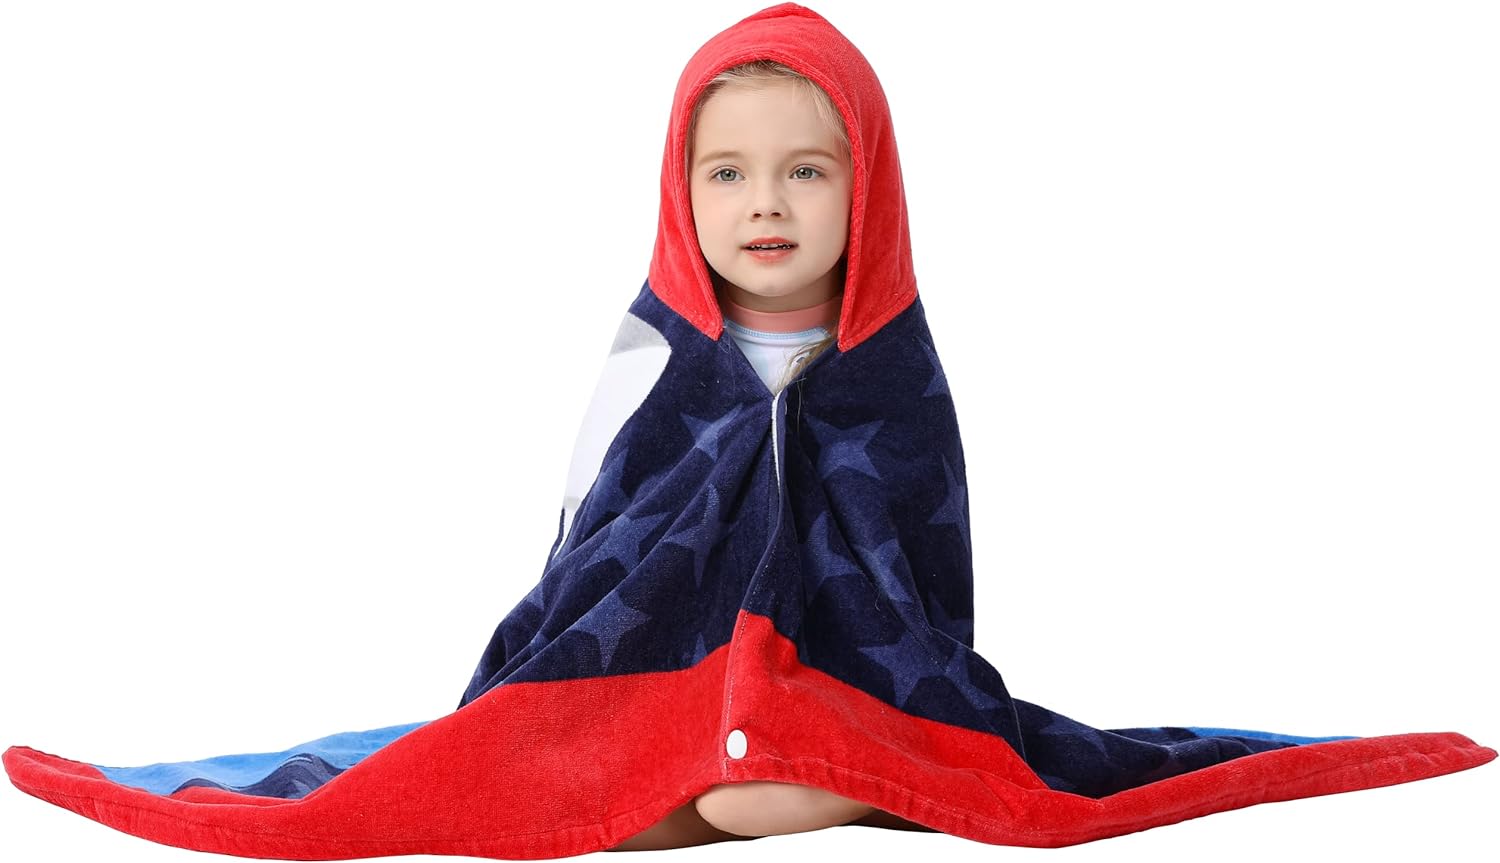 Athaelay Premium Cotton Hooded Towel for Kids | Great White Shark Design | Product Review